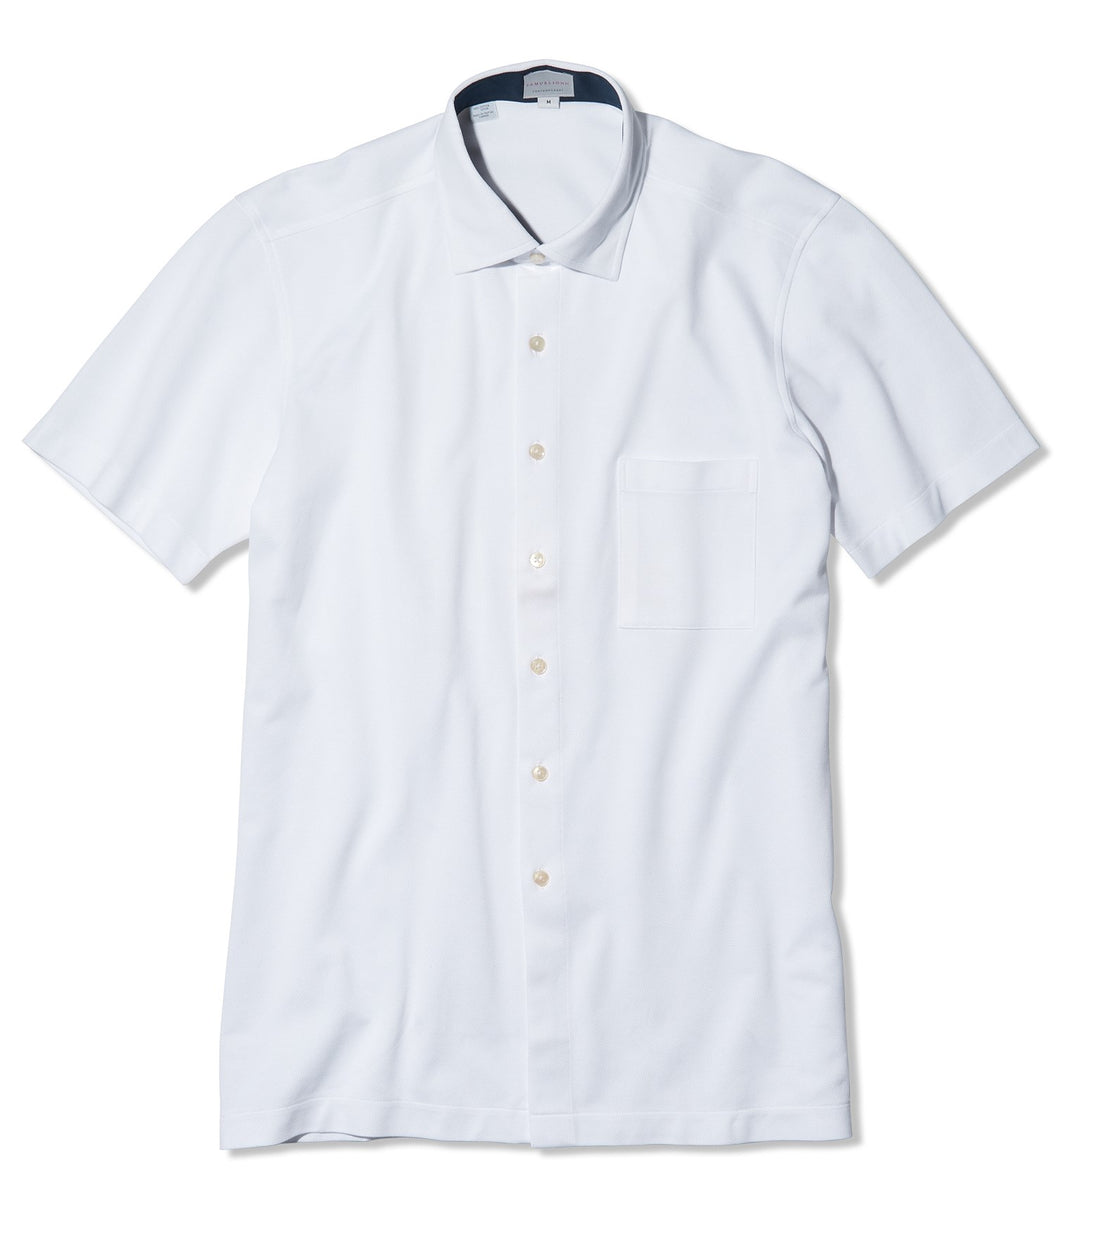 White designer pique knit shirt is breathable and lightweight in 100 percent cotton from VUE collection by Samuelsohn